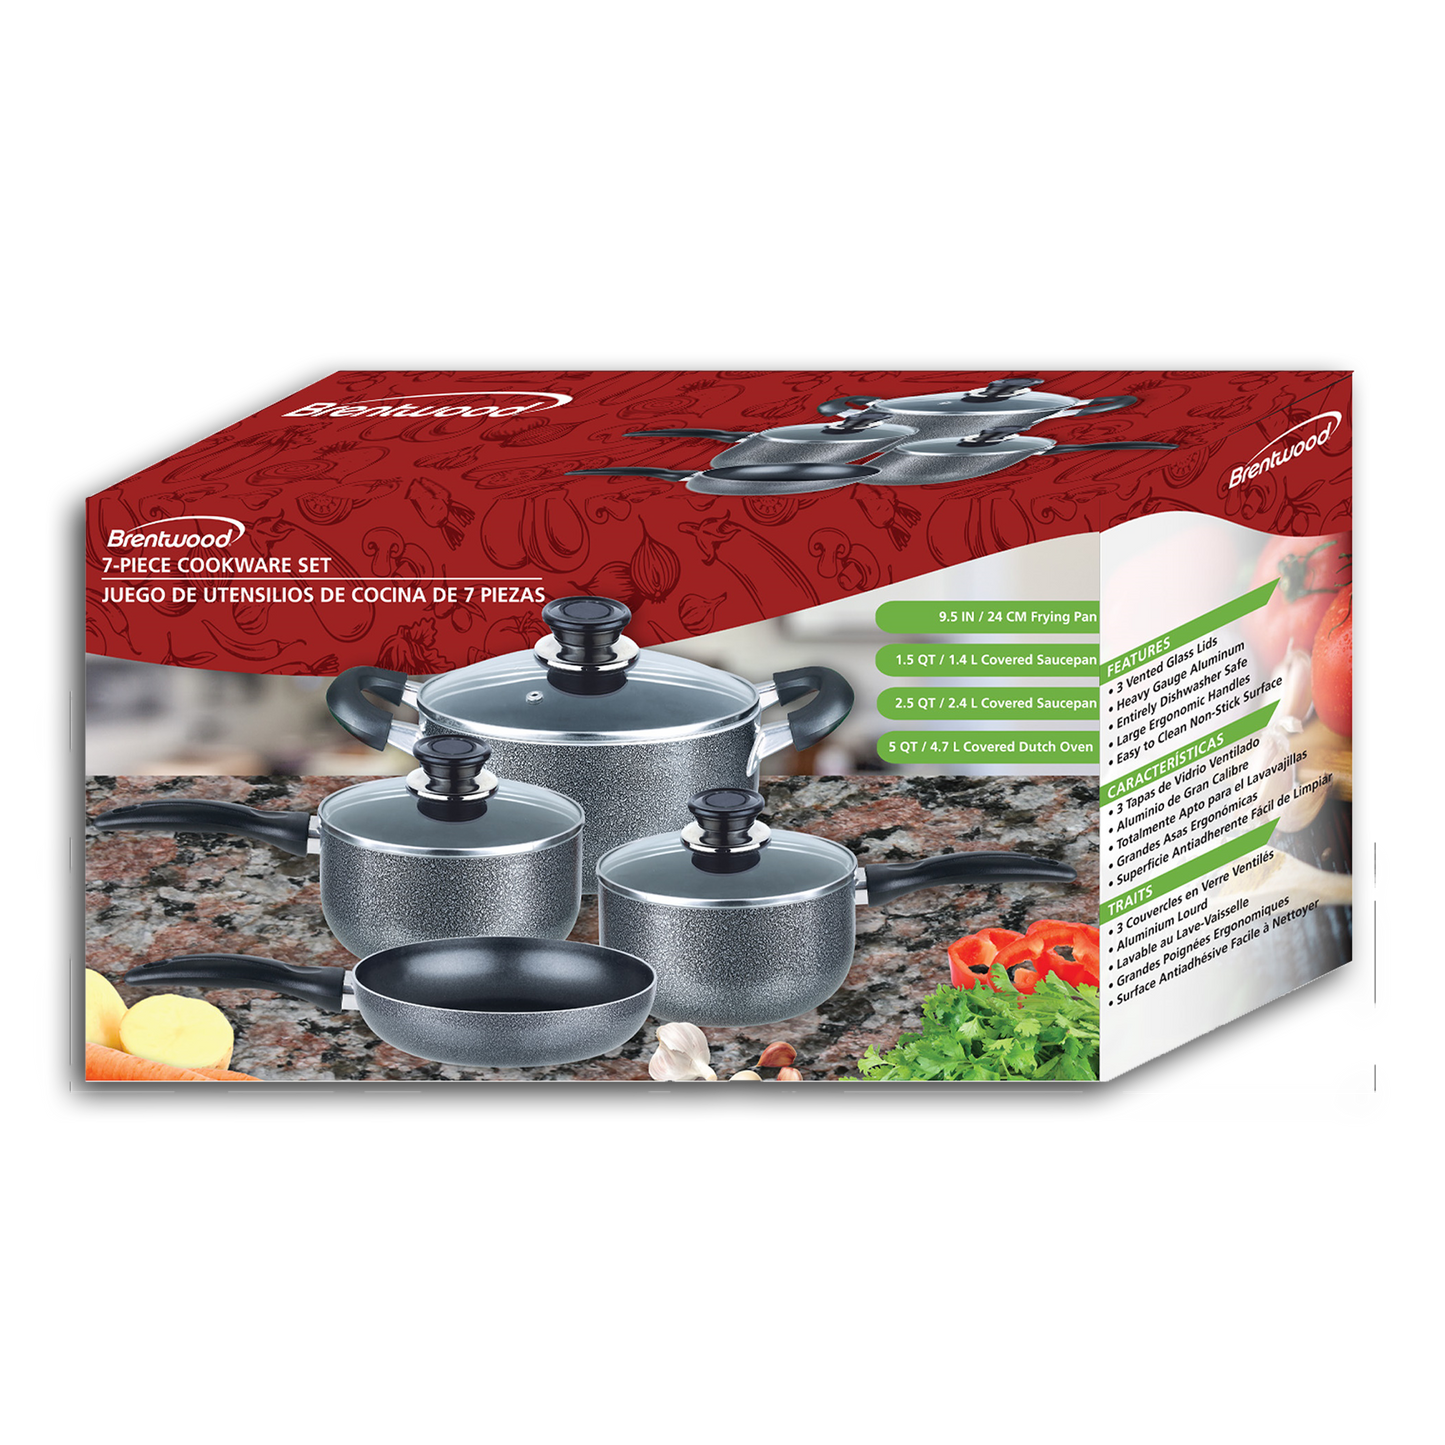 BRENTWOOD 7PC COOKWARE SET